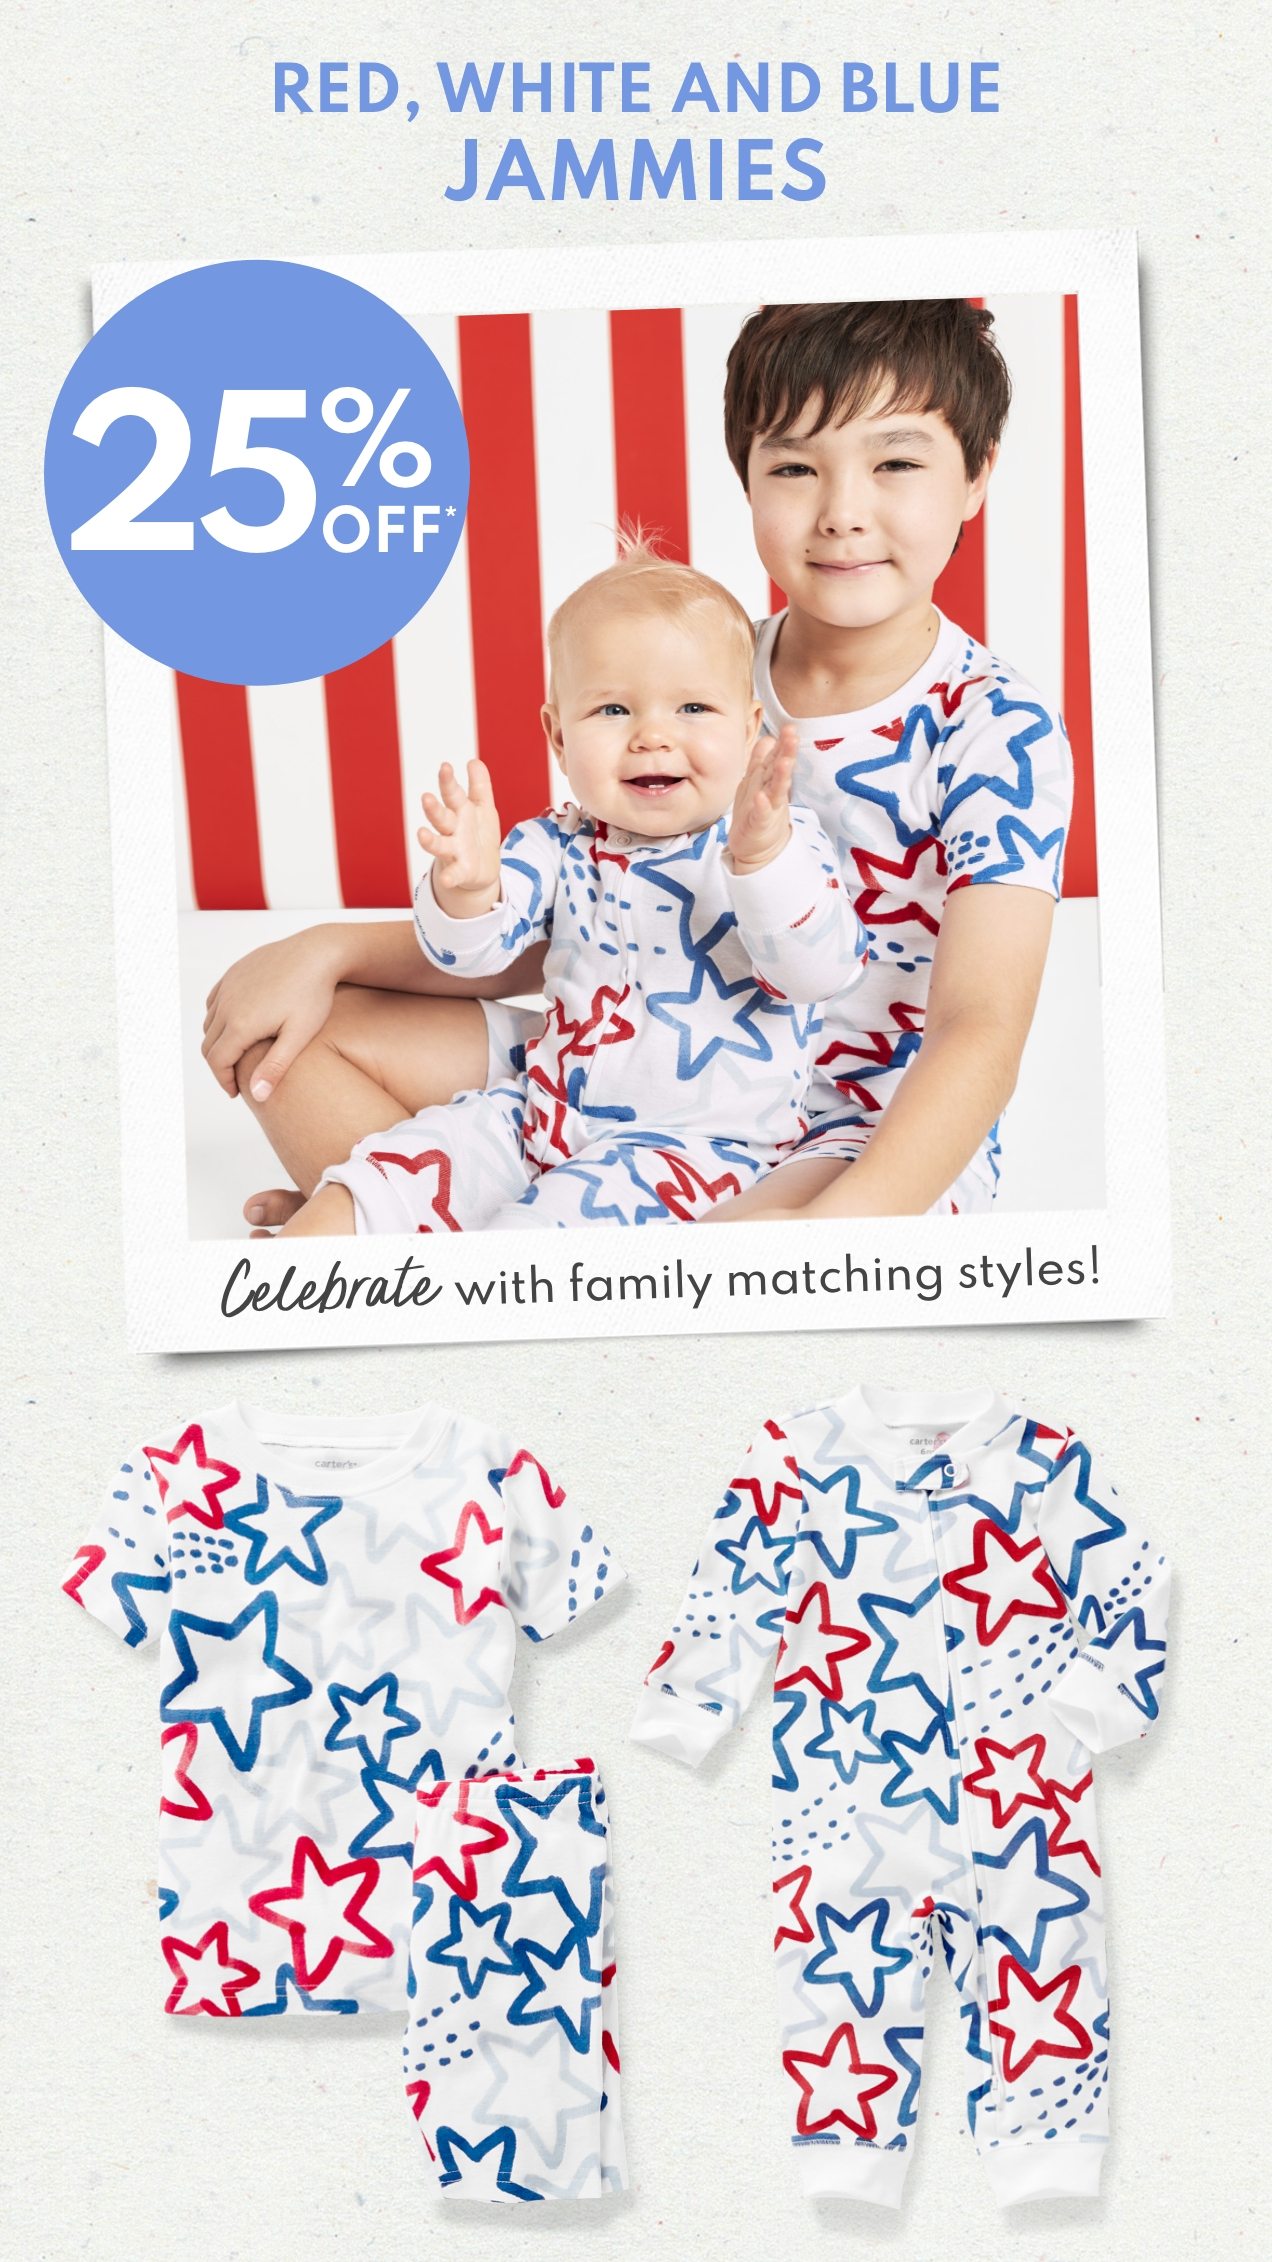 RED, WHITE AND BLUE JAMMIES | 25% OFF | Celebrate with family matching styles! 